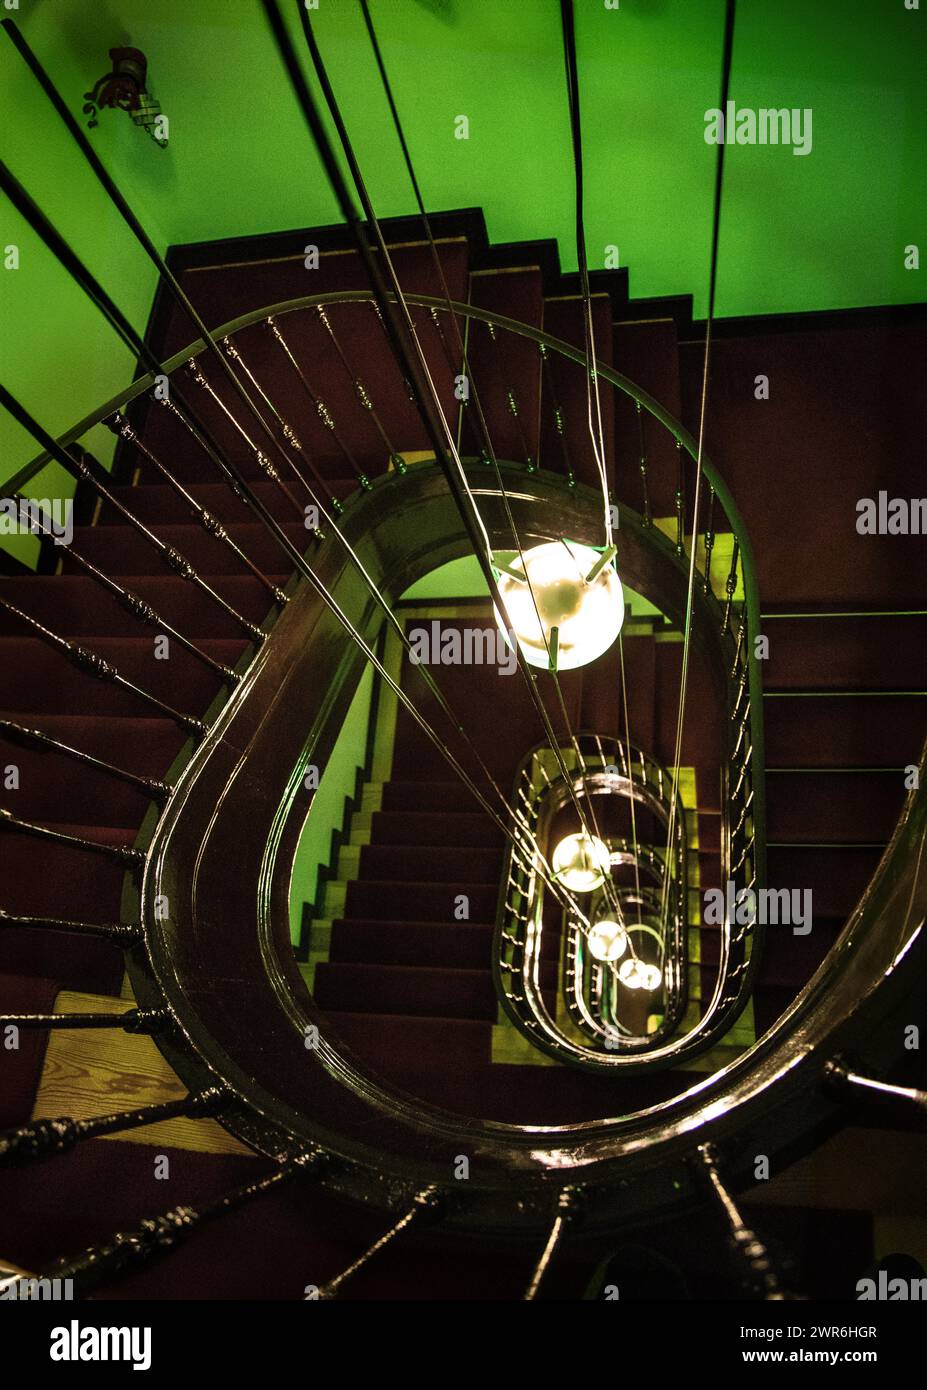 A photograph captures the allure of an ancient spiral staircase, its intricate design inviting exploration and evoking a sense of timeless elegance Stock Photo